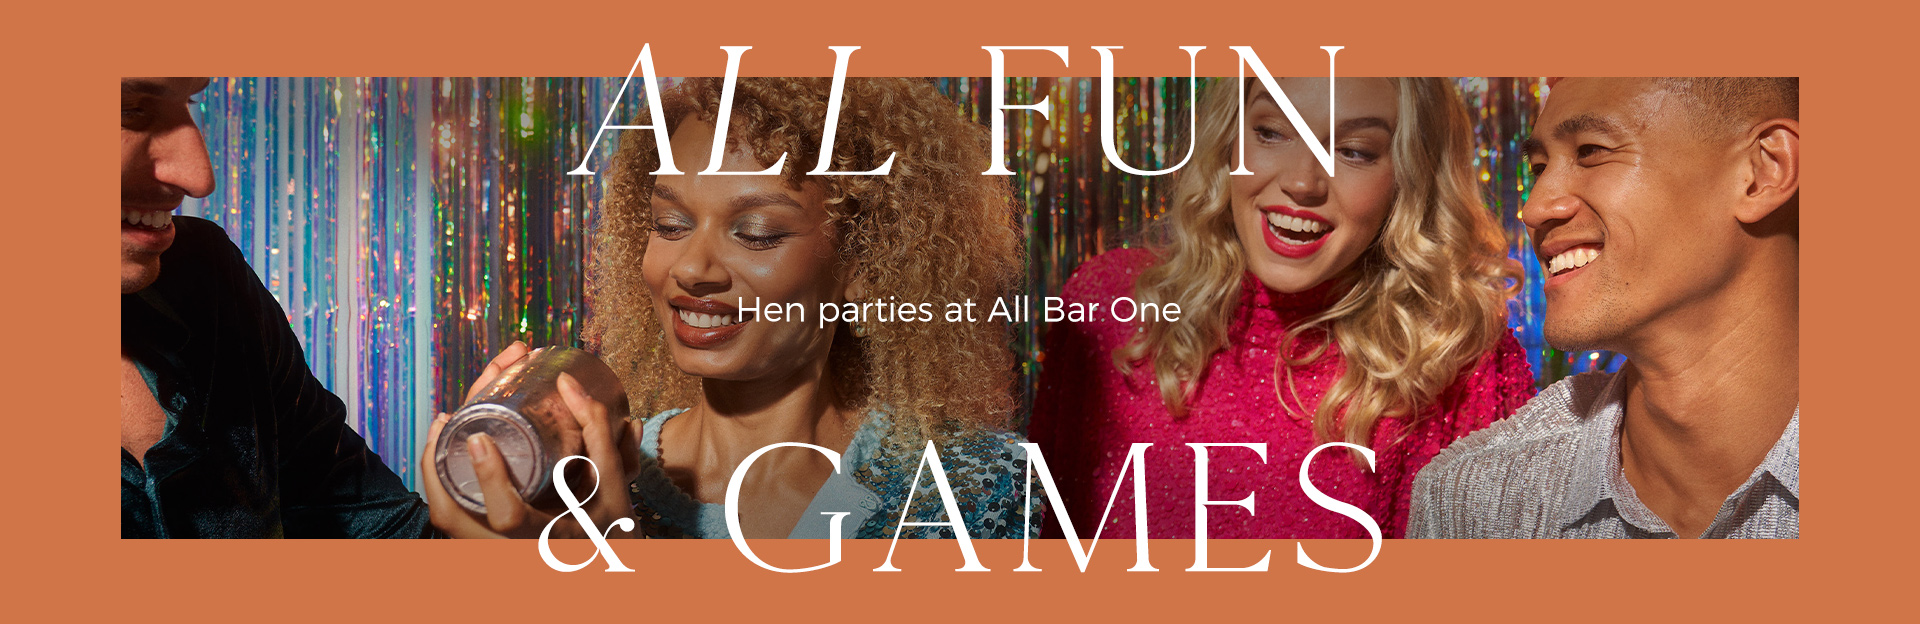 Hen parties at All Bar One Leicester Square